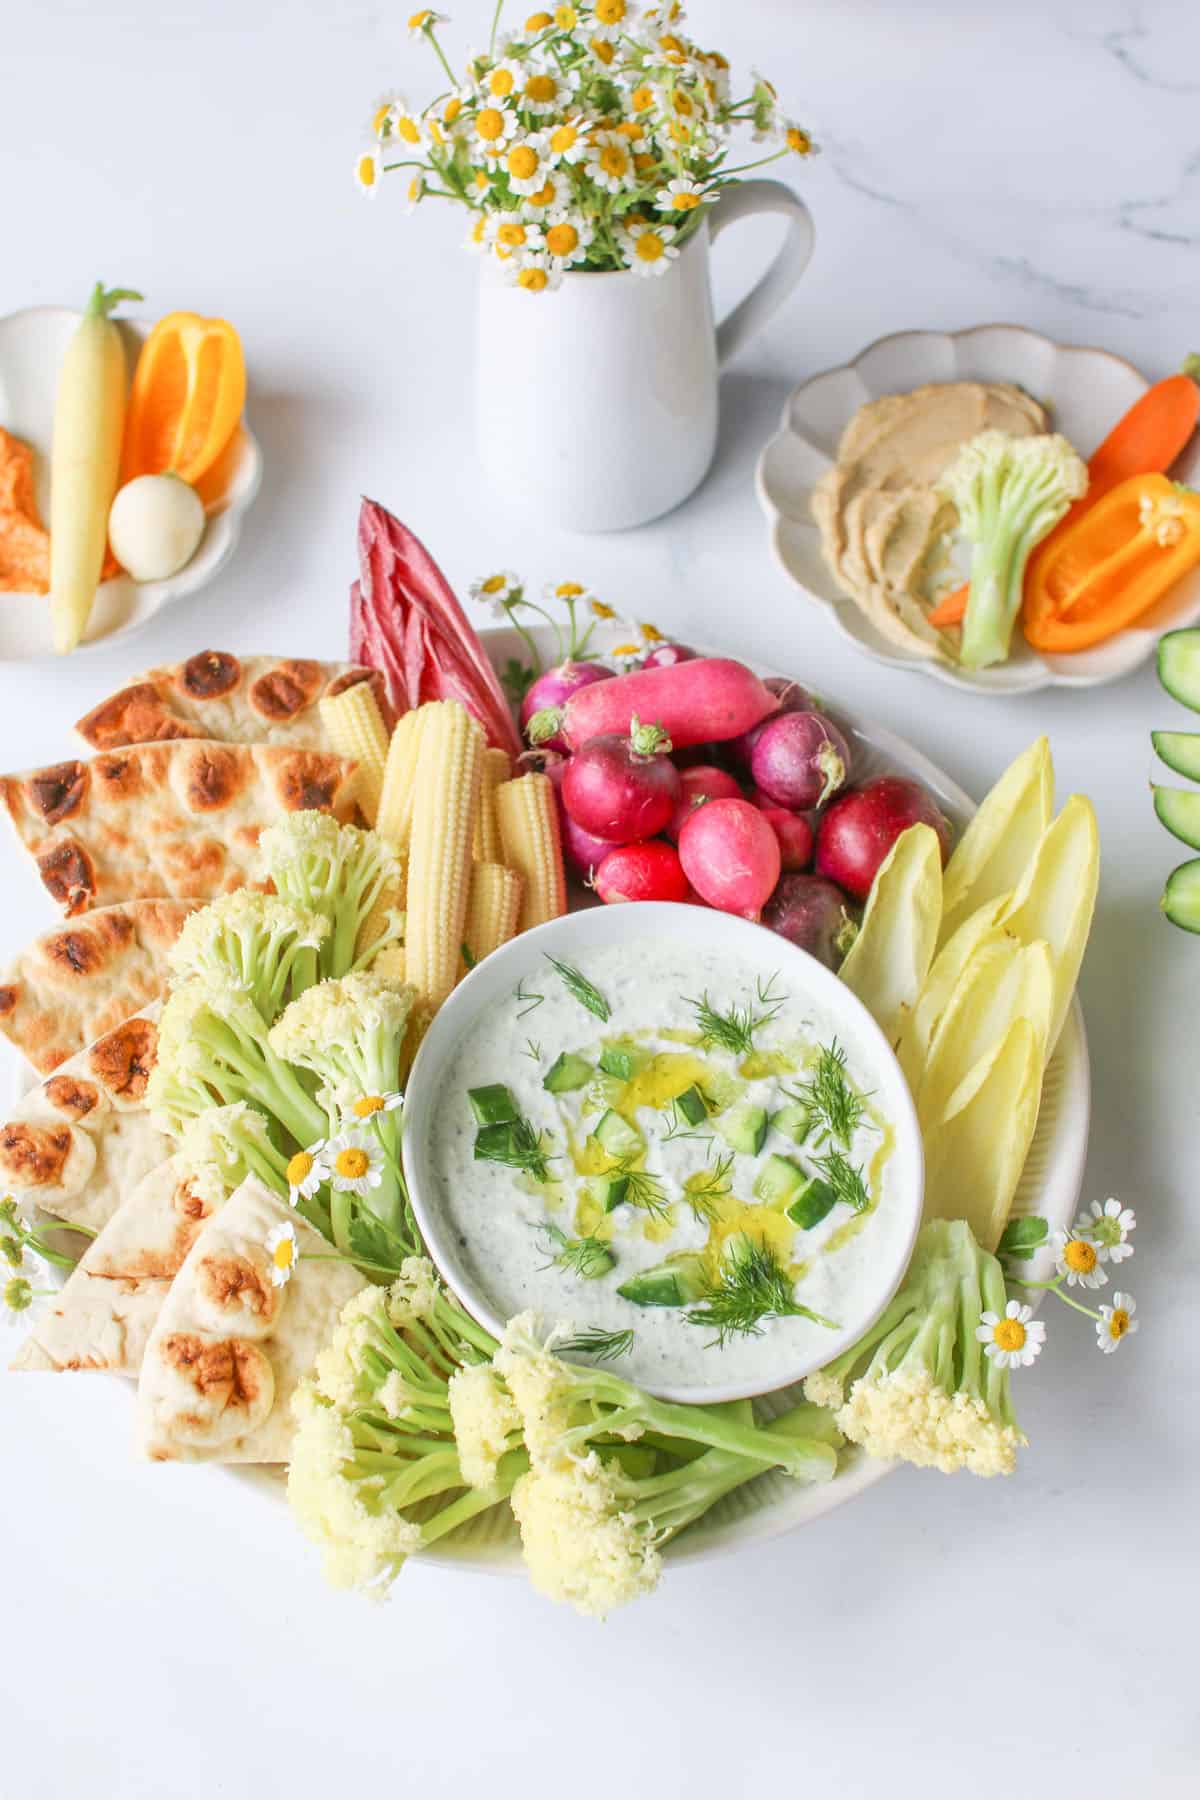 tzatziki dip in a small white bowl with dill, olive oil and diced cucumber on a round plate with vegetables and toasted pita surrounding on a white marble background.